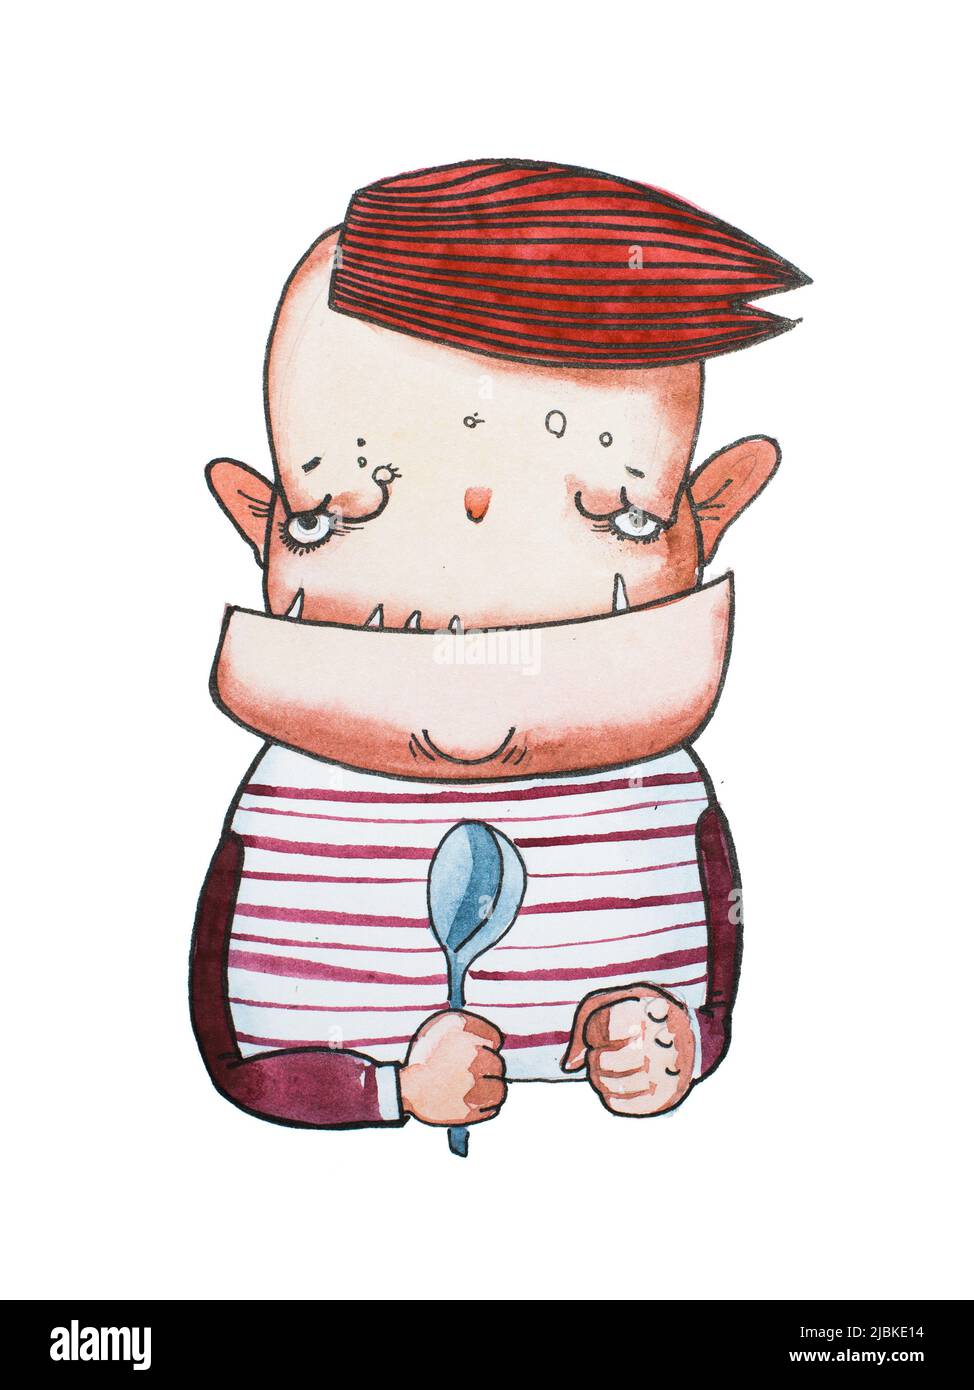 Gloomy cartoon monster boy with square jaw and sharp teeth waiting for his meal holding a spoon. Comic book character hand-drawn with watercolors. Stock Photo